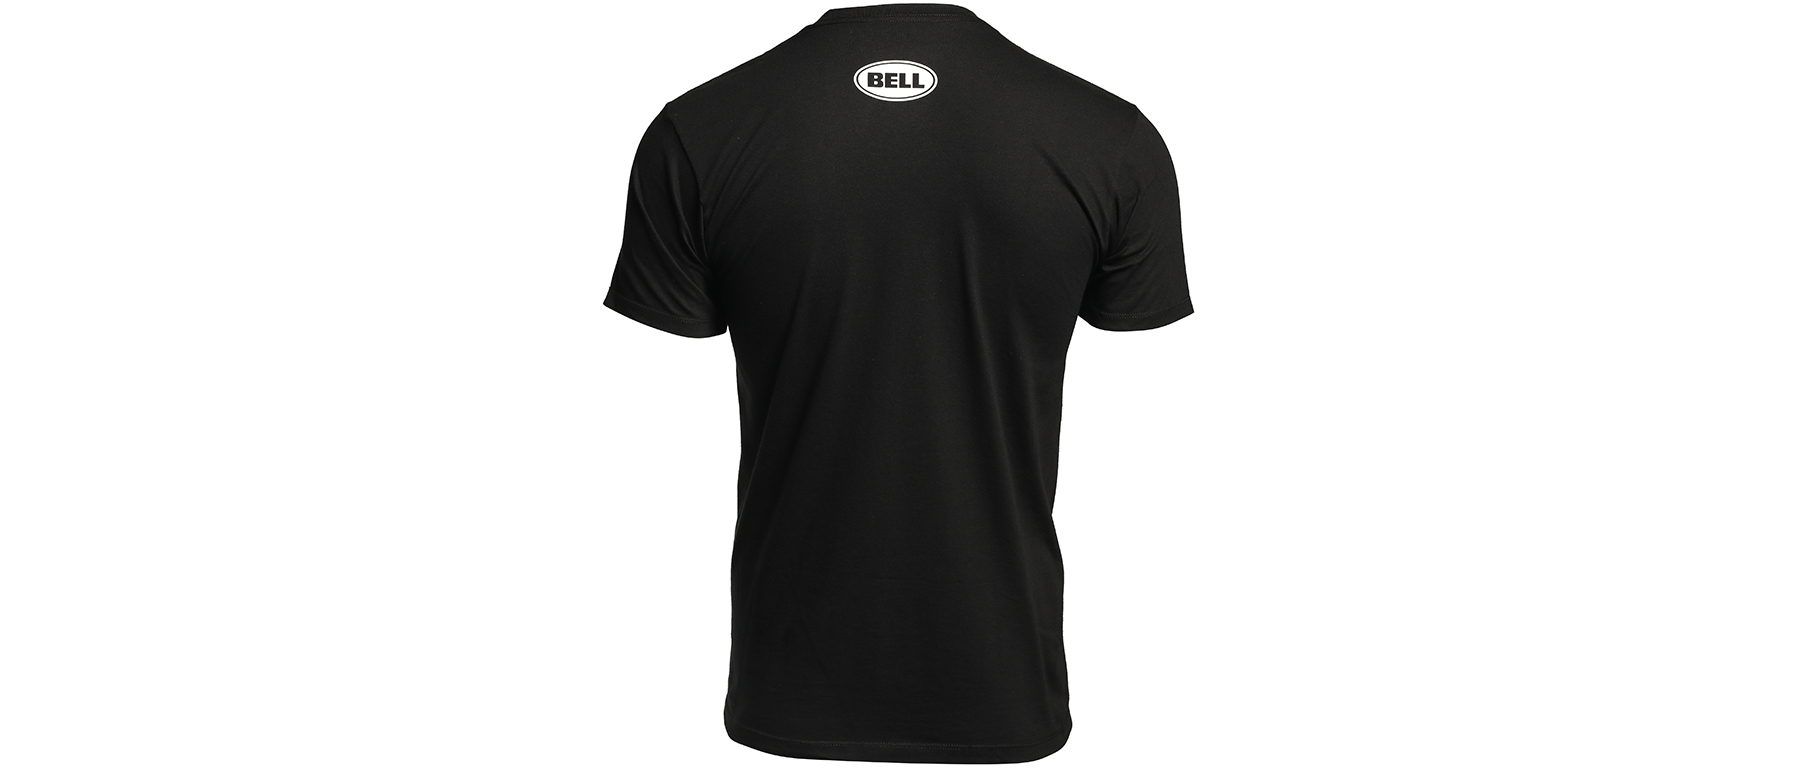 Bell Choice of Pros T-Shirt